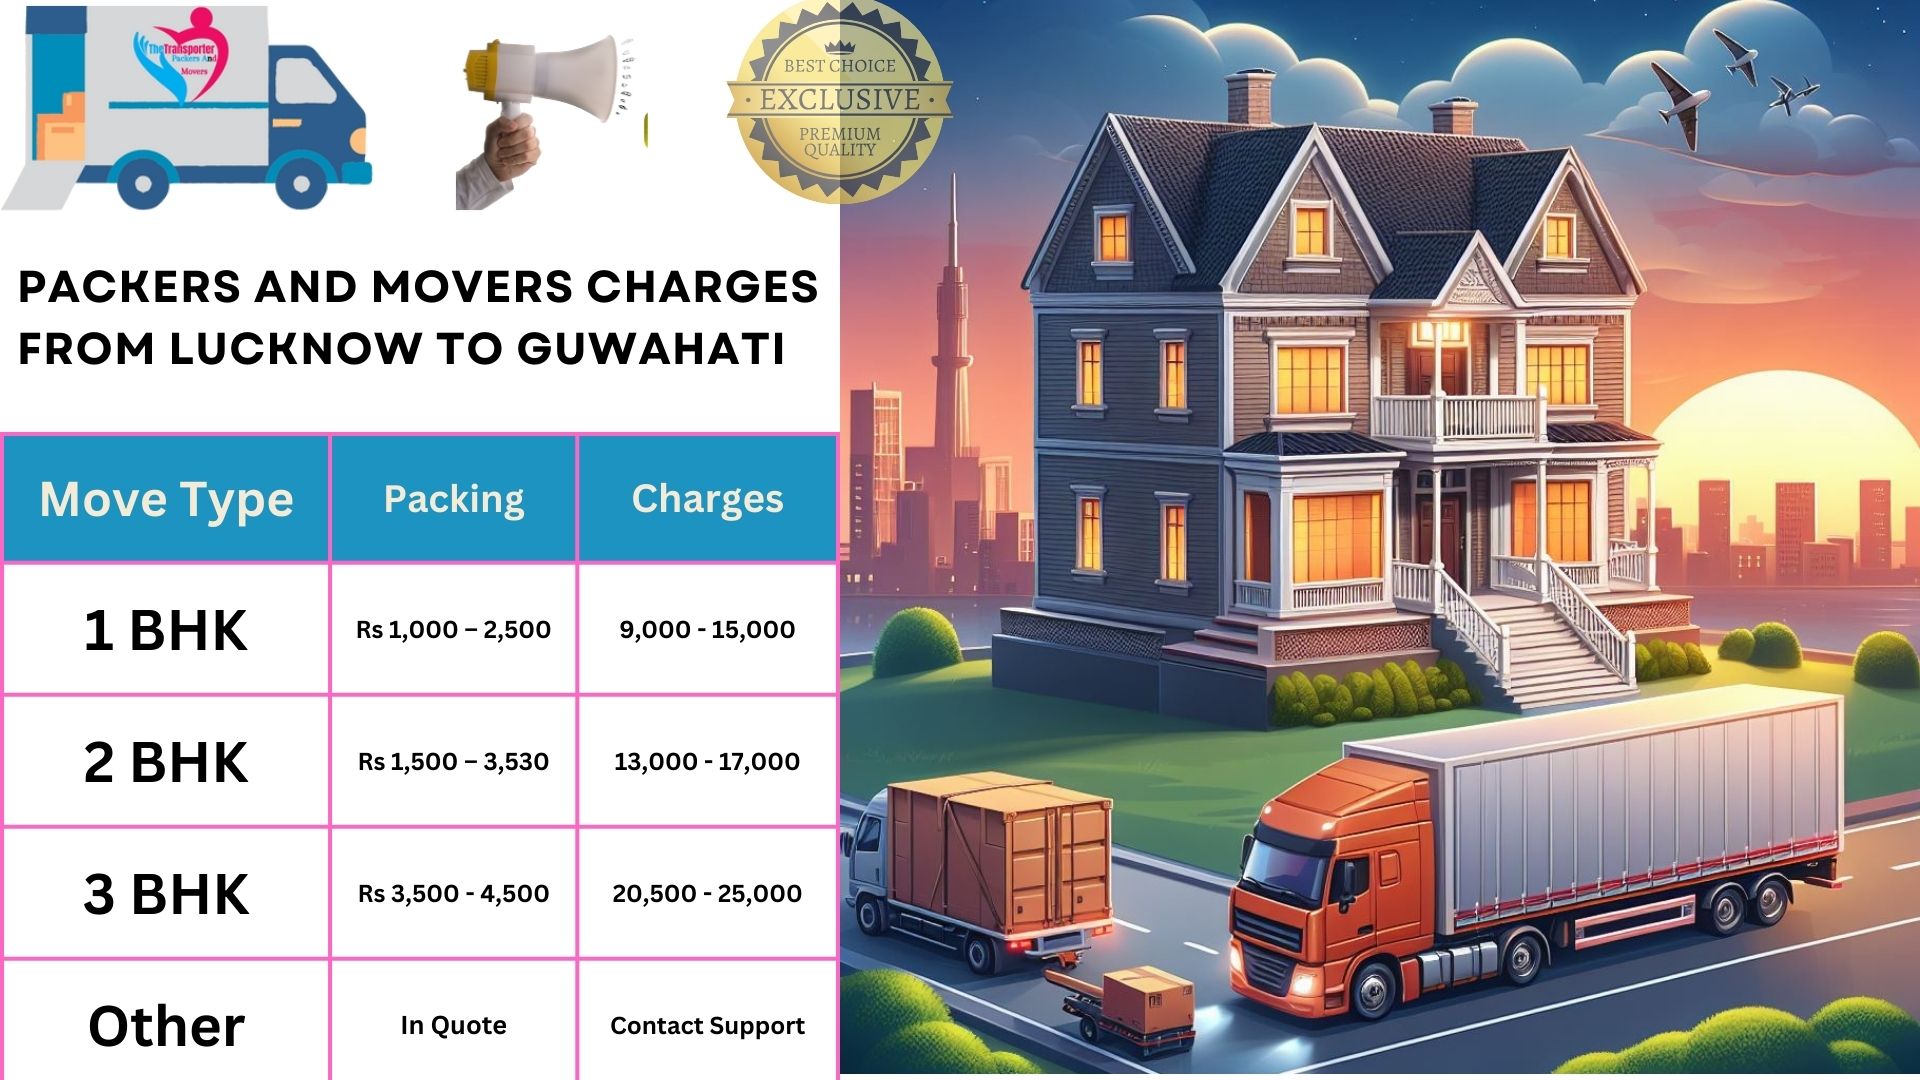 Your household goods shifting from Lucknow to Guwahati